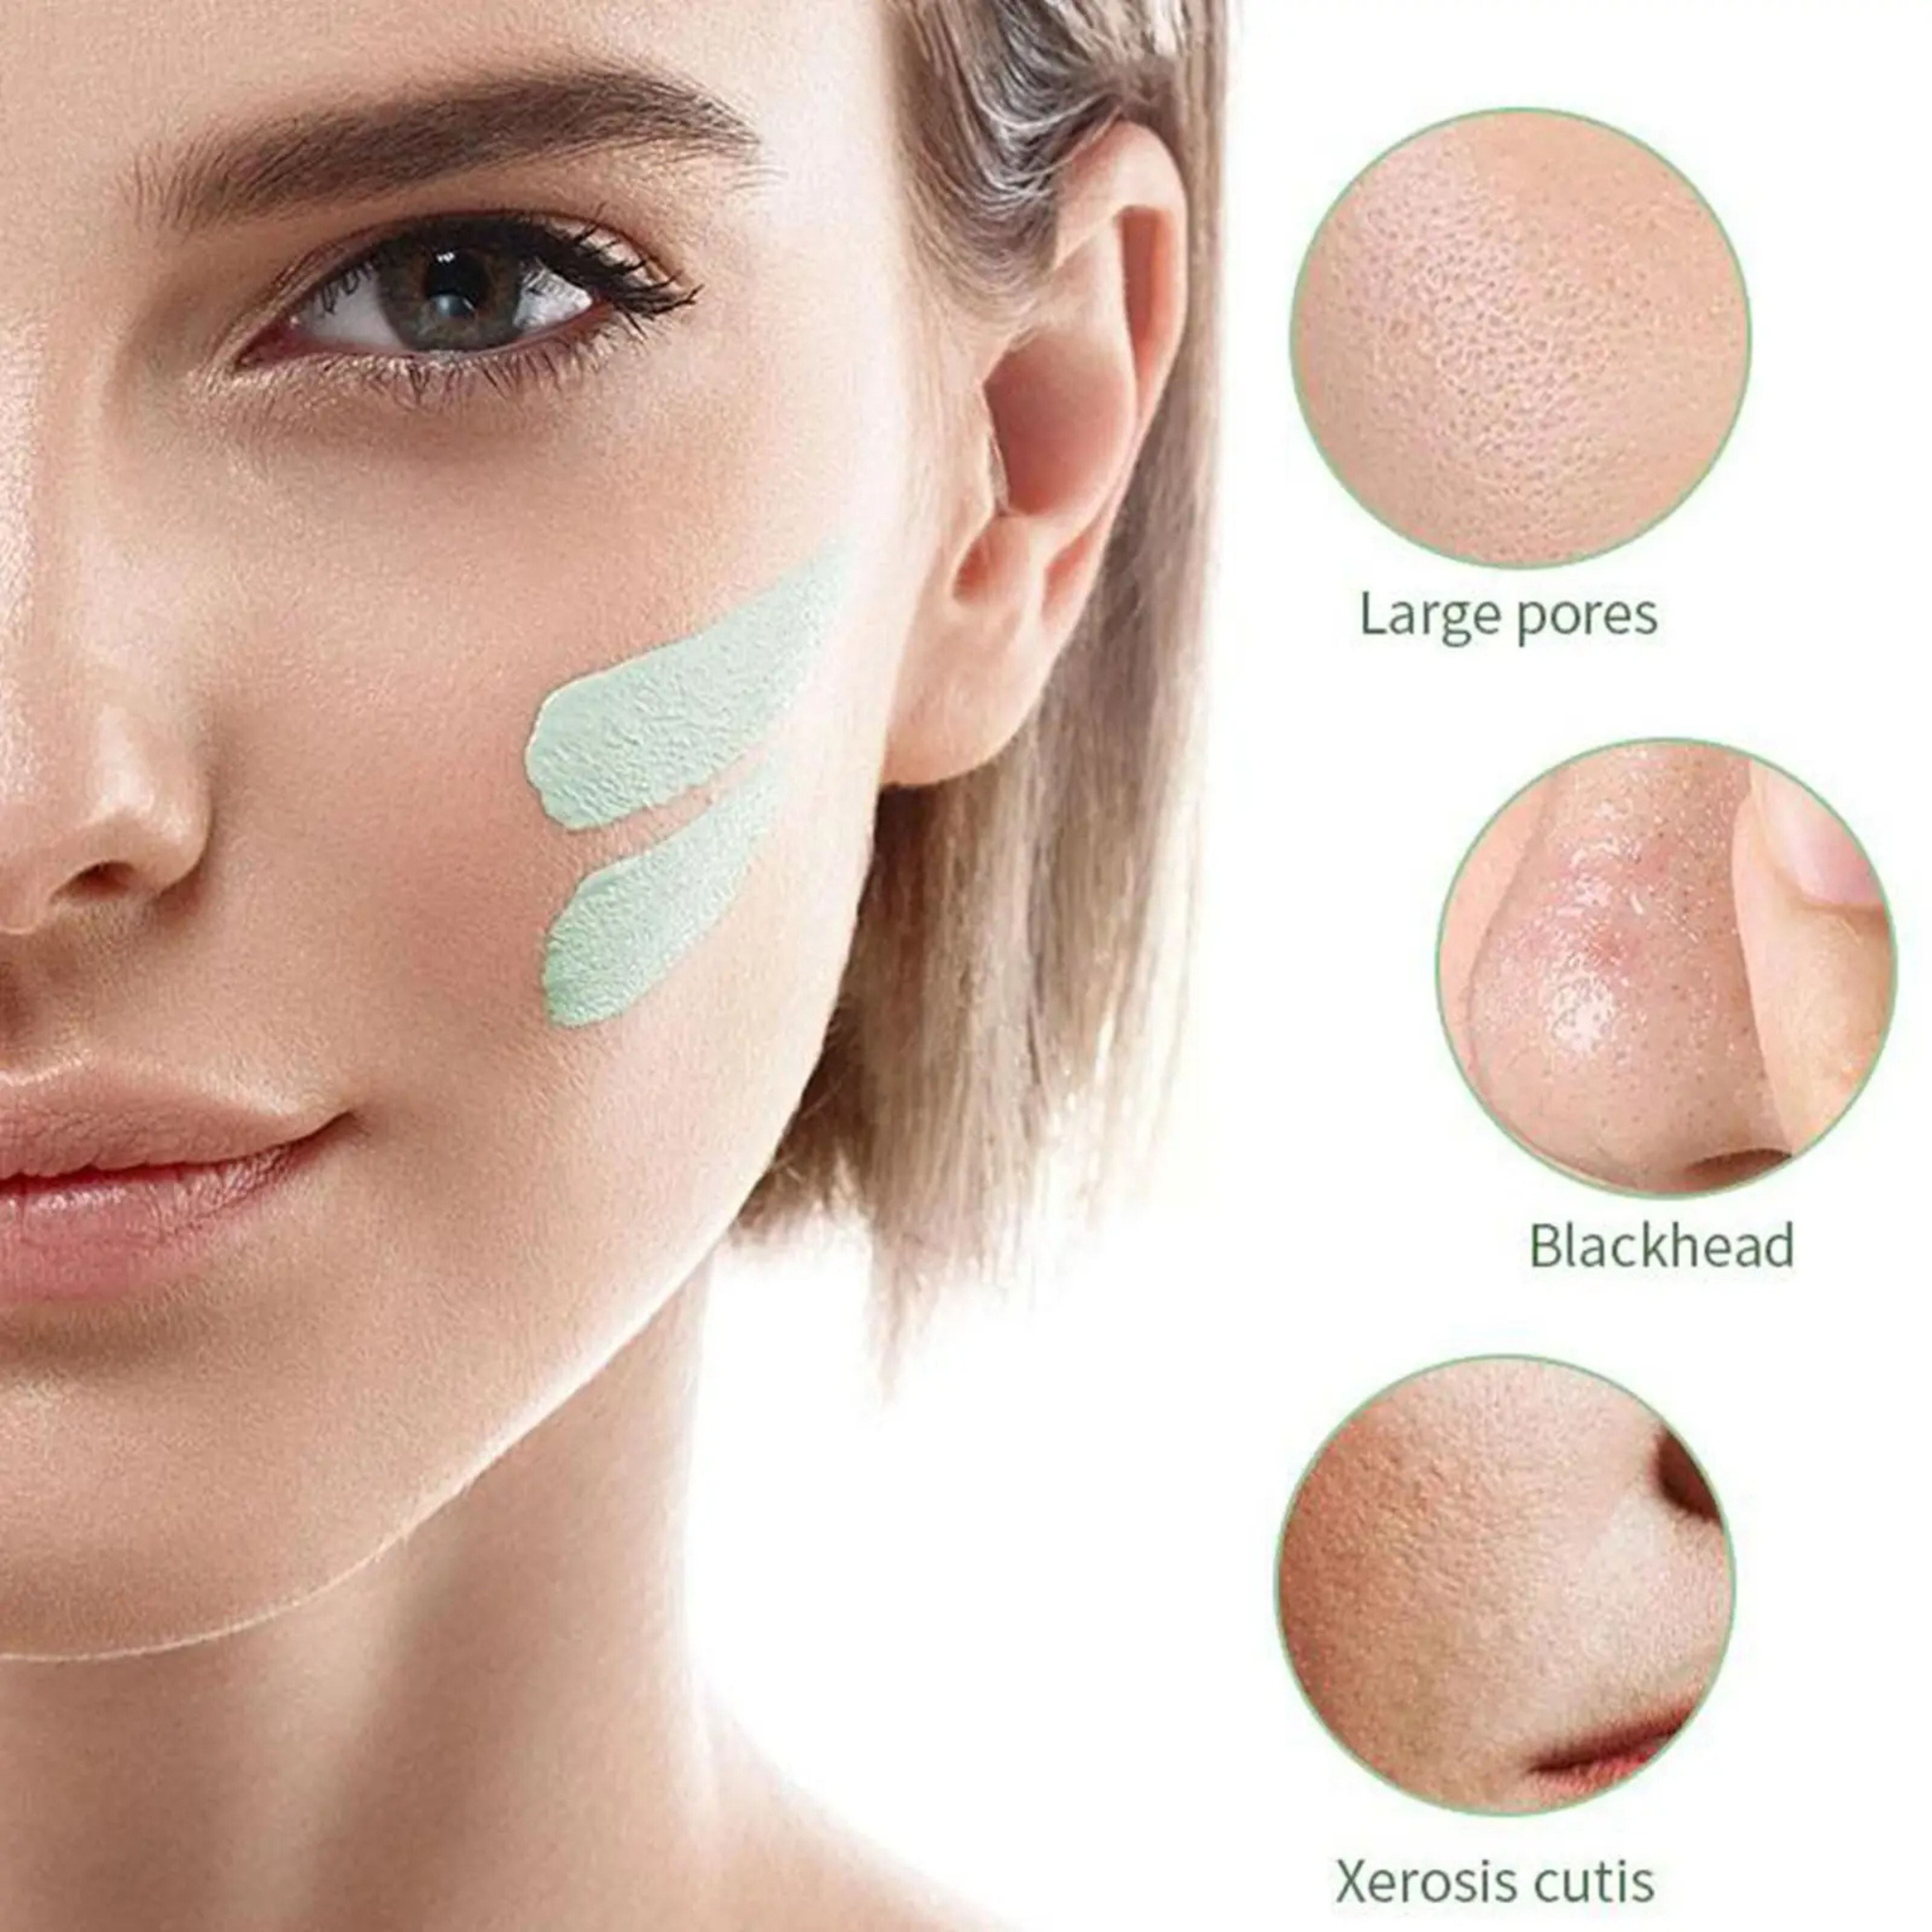 Green Tea Facemask Stick for All Imperfections